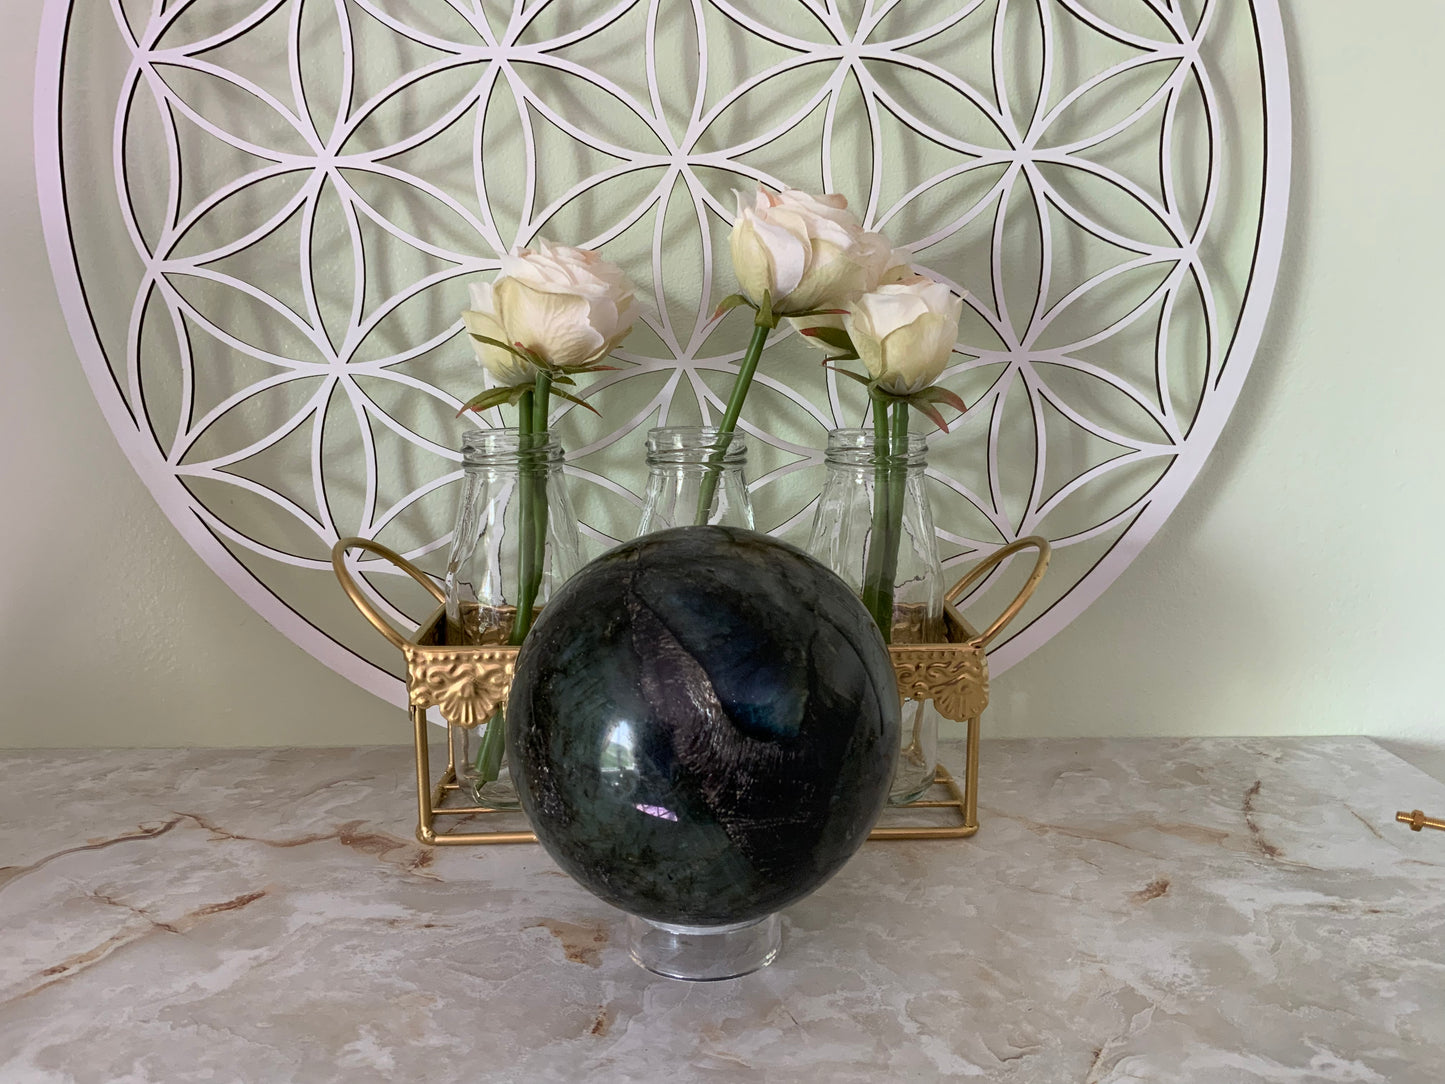 Awesome Labradorite Sphere weighs over 4 pounds